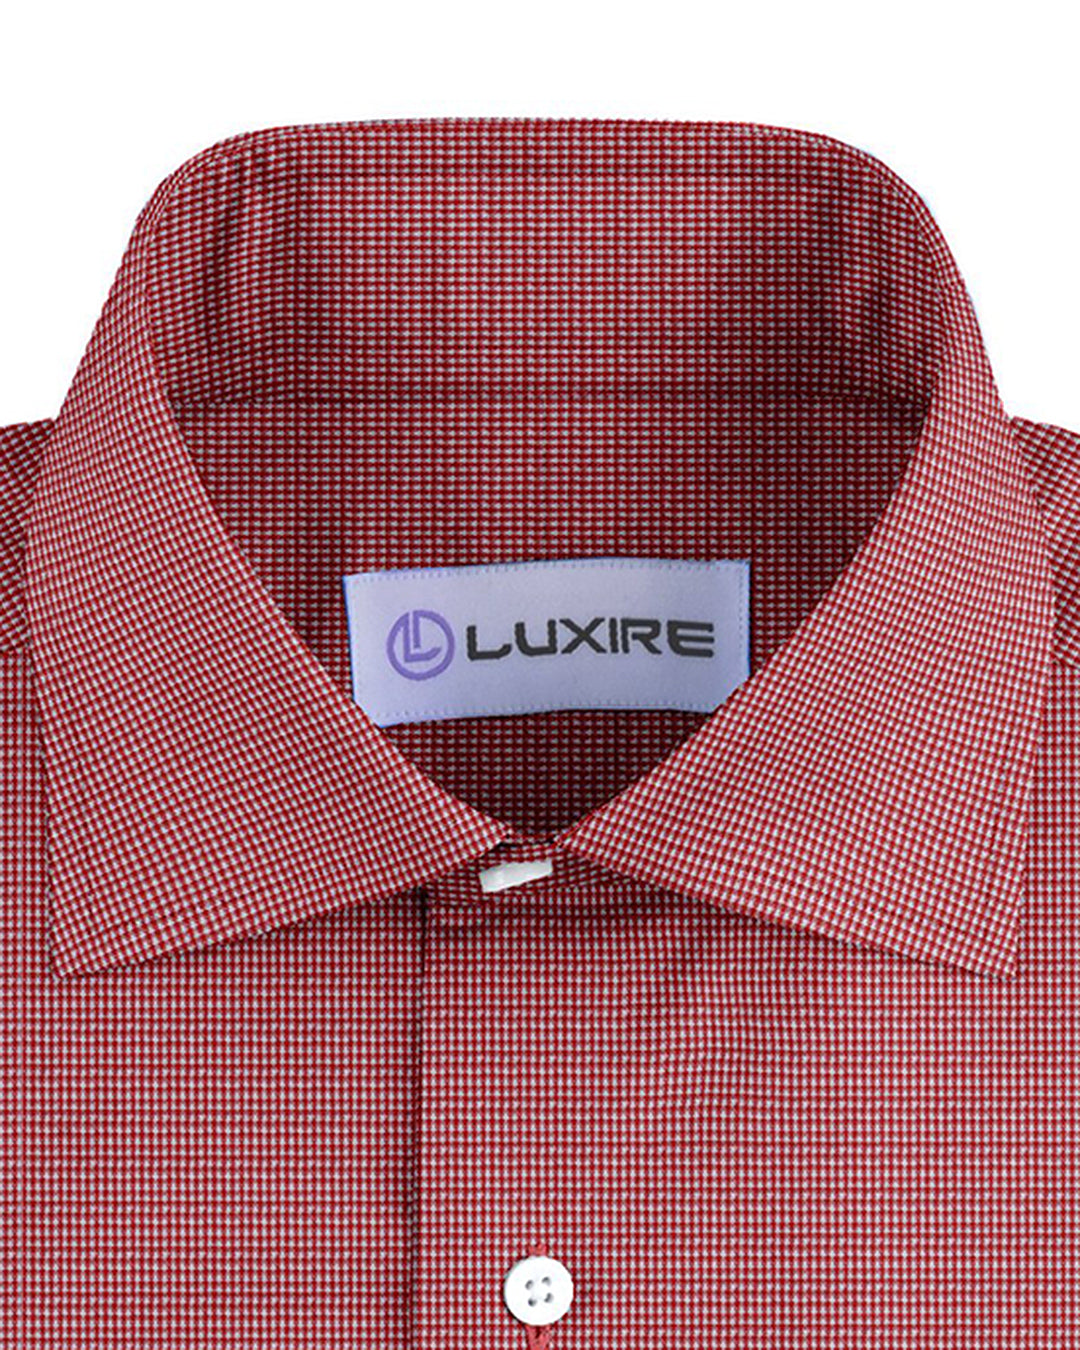 Collar of the custom linen shirt for men in red and white checks by Luxire Clothing